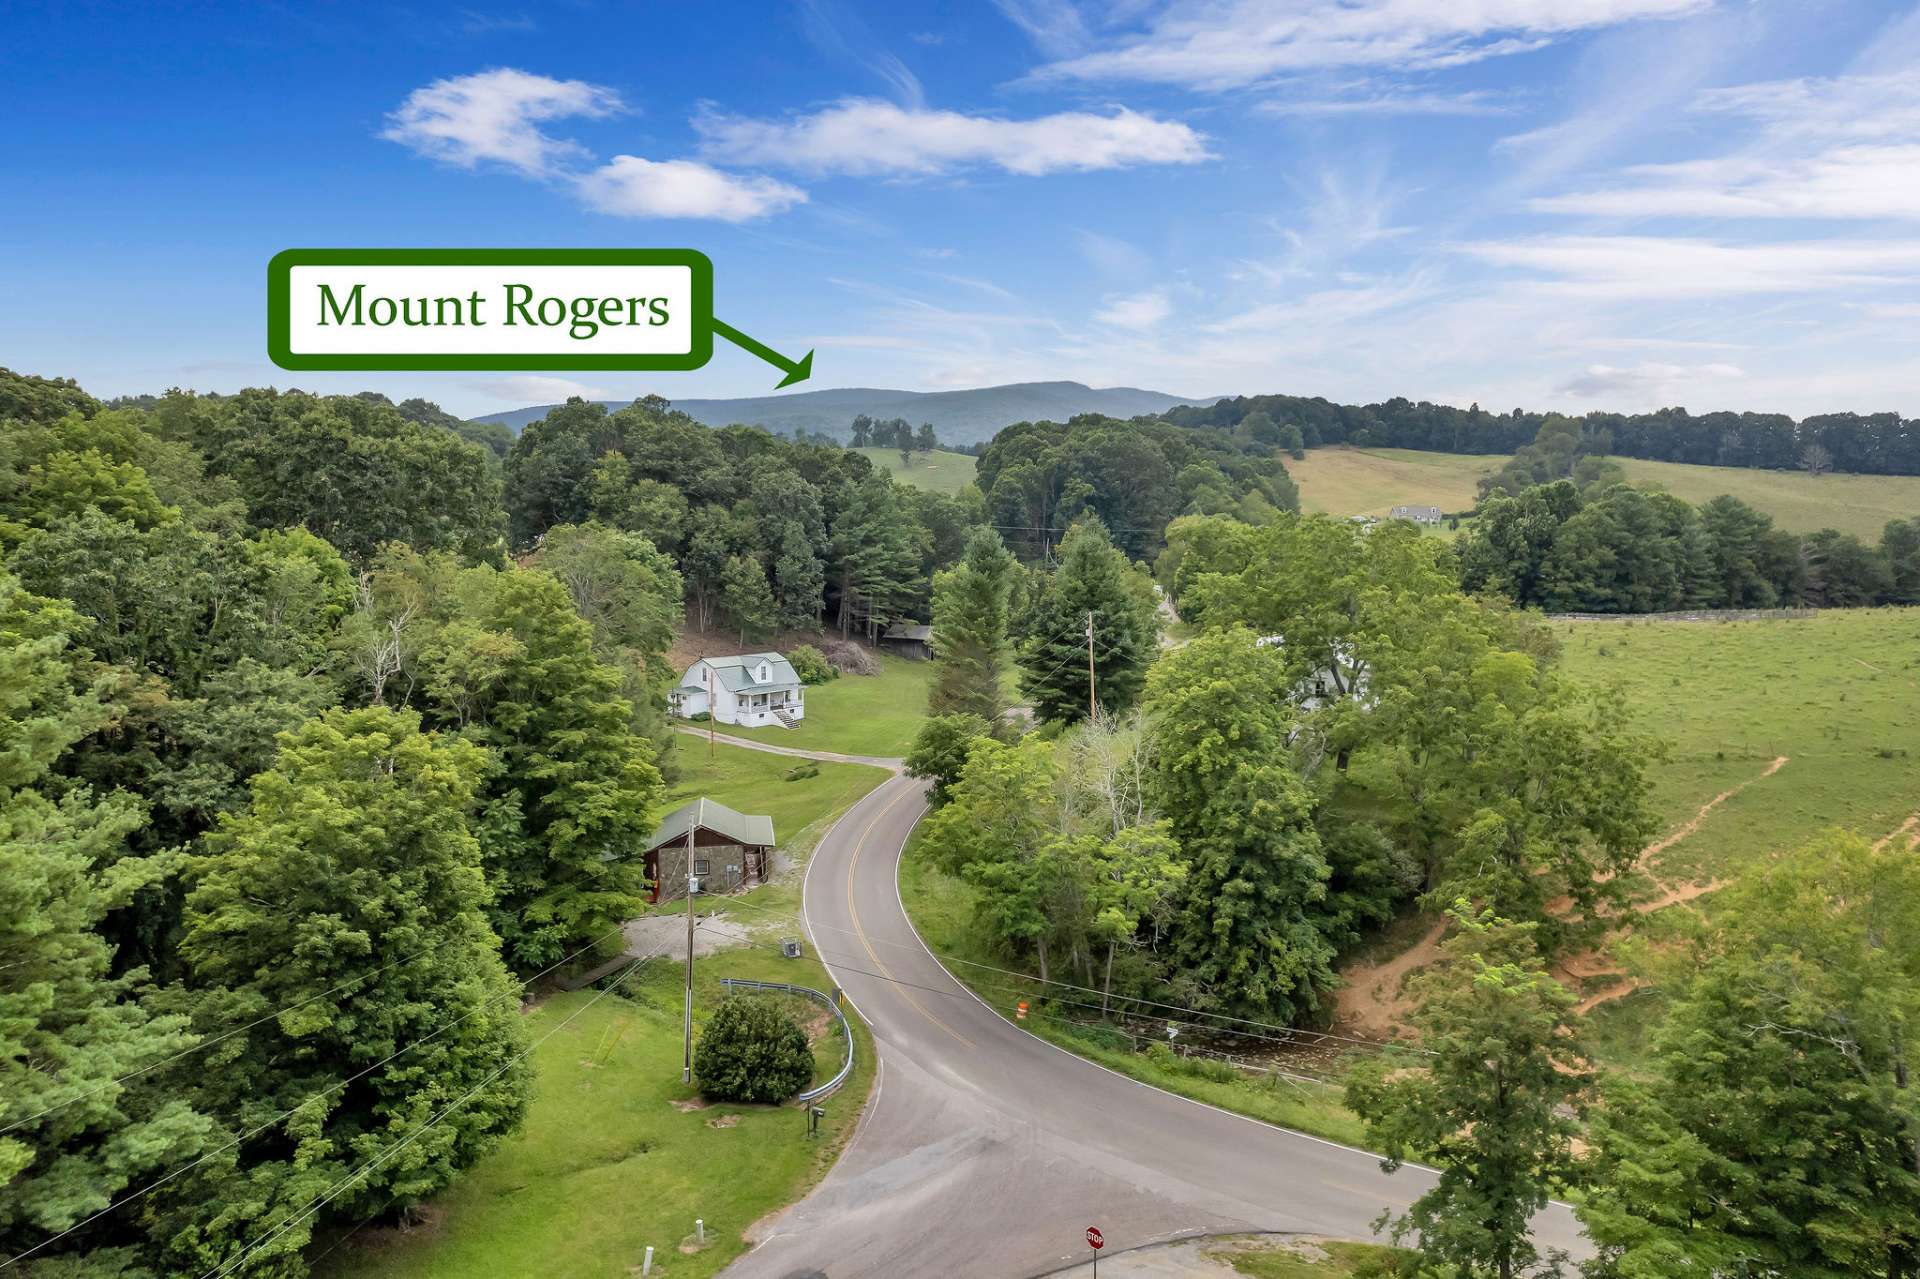 Relax on the decks and porch with mountain views to include Mount Rogers